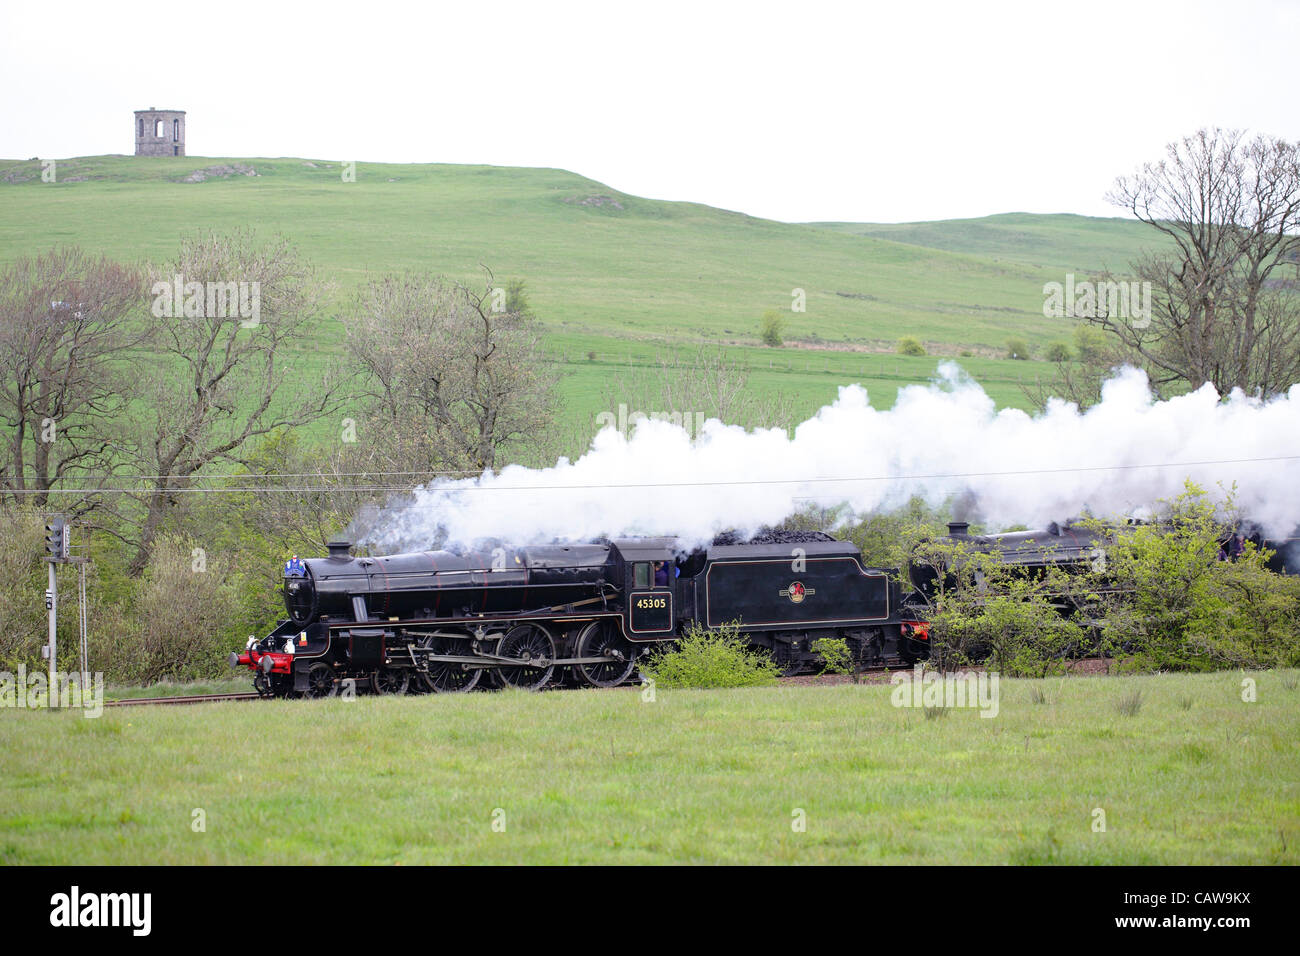 Renfrewshire, Scotland, UK, Wednesday, 25th April, 2012. Steam engine LMS Stanier, Class 5, Number 45305, passing Castle Semple Temple between Howwood and Lochwinnoch travelling on the main line from Glasgow on the way to Stranraer Stock Photo